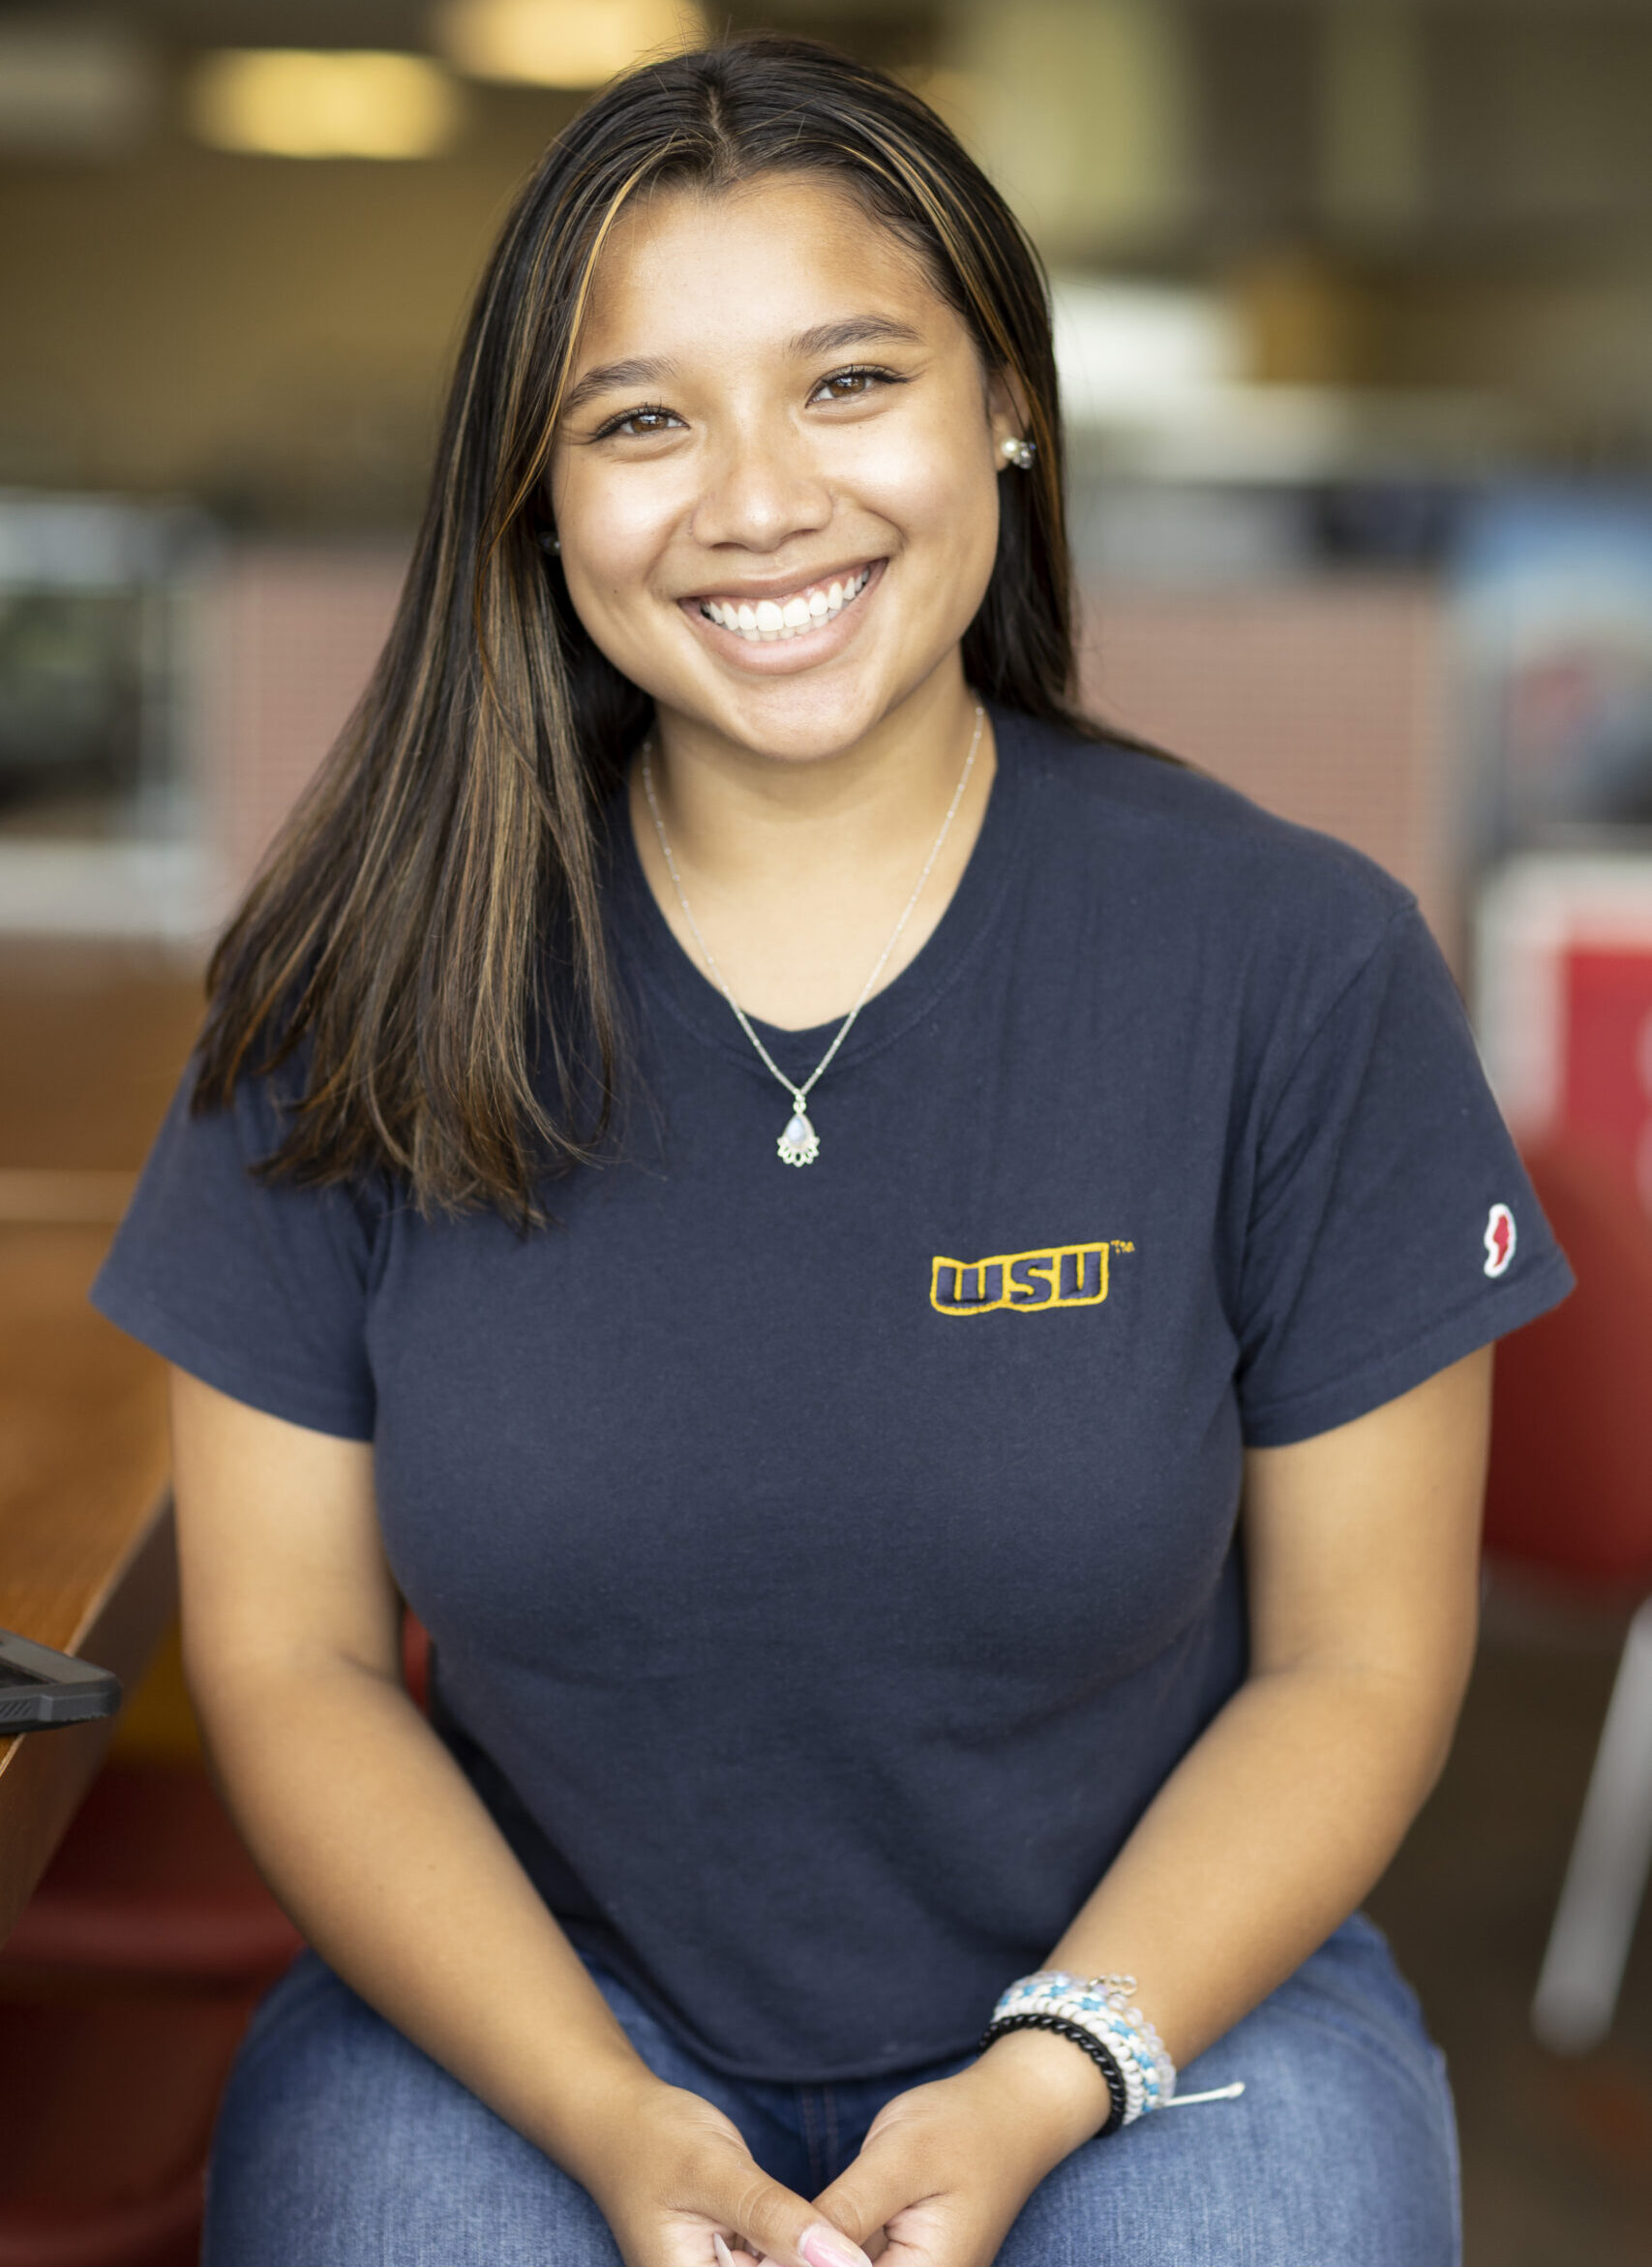 A smiling Worcester State student wearing a WSU teeshirt